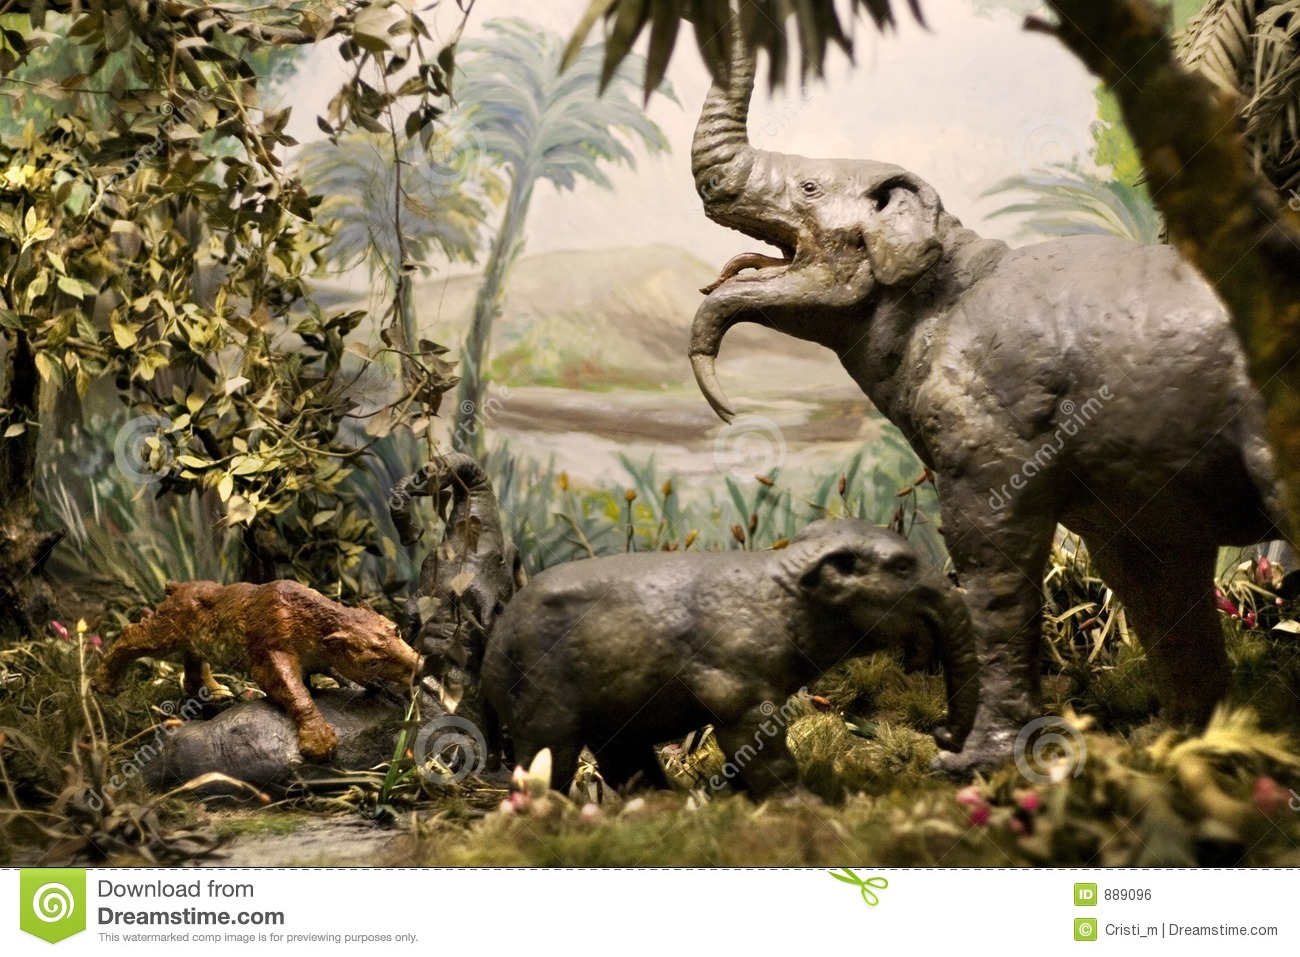 Natural History Museum Exhibition Royalty Free Stock Image   Image